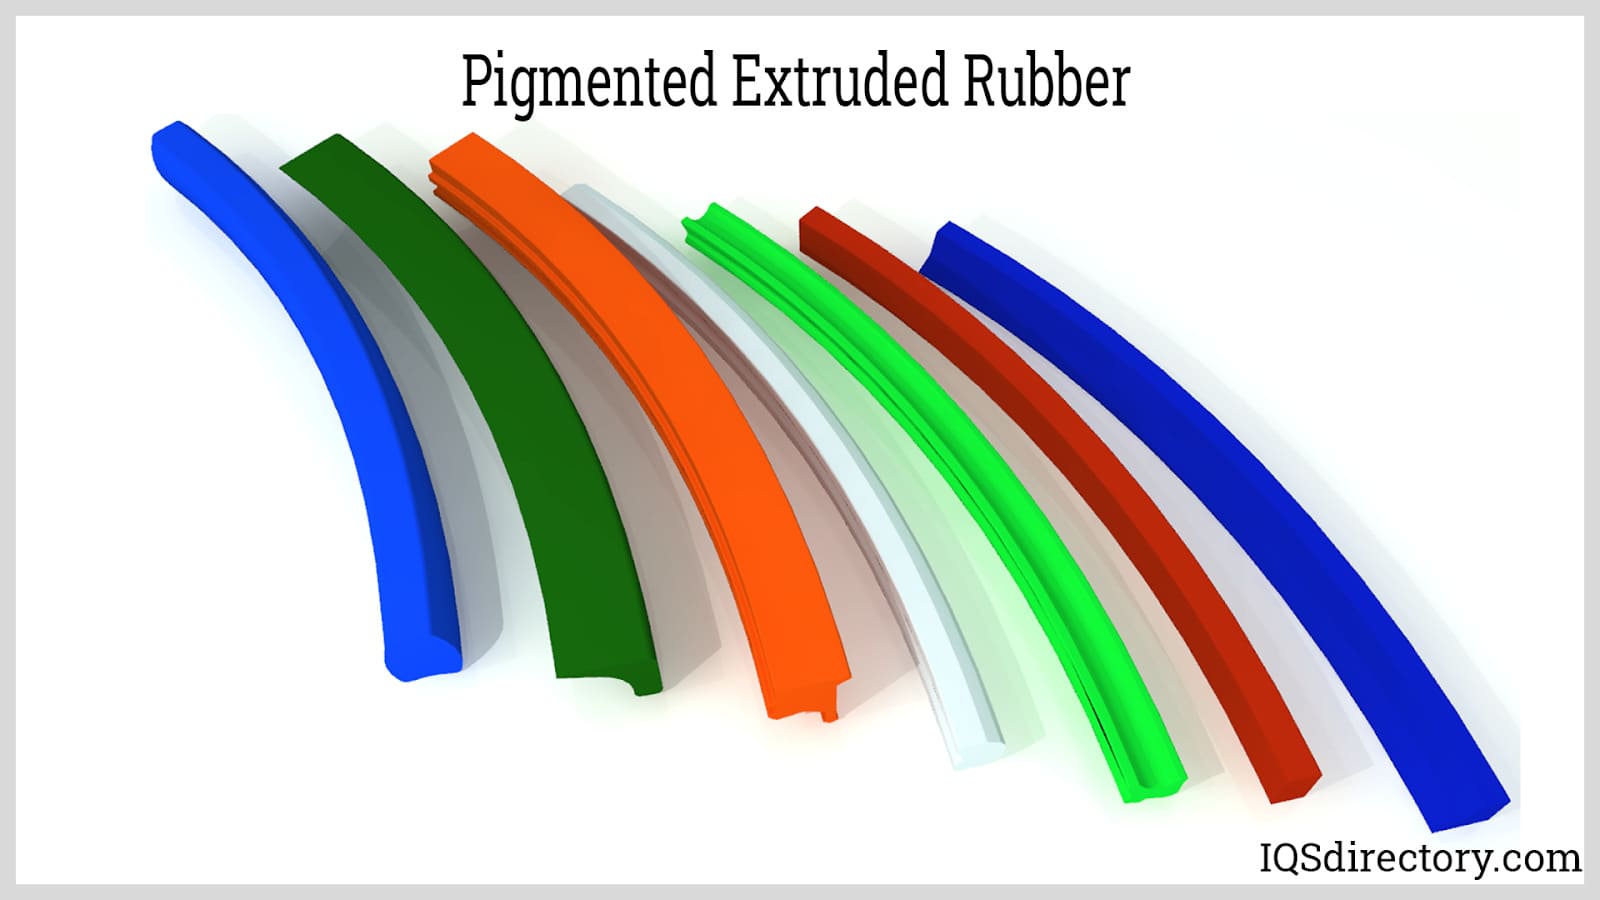 Pigmented Extruded Rubber